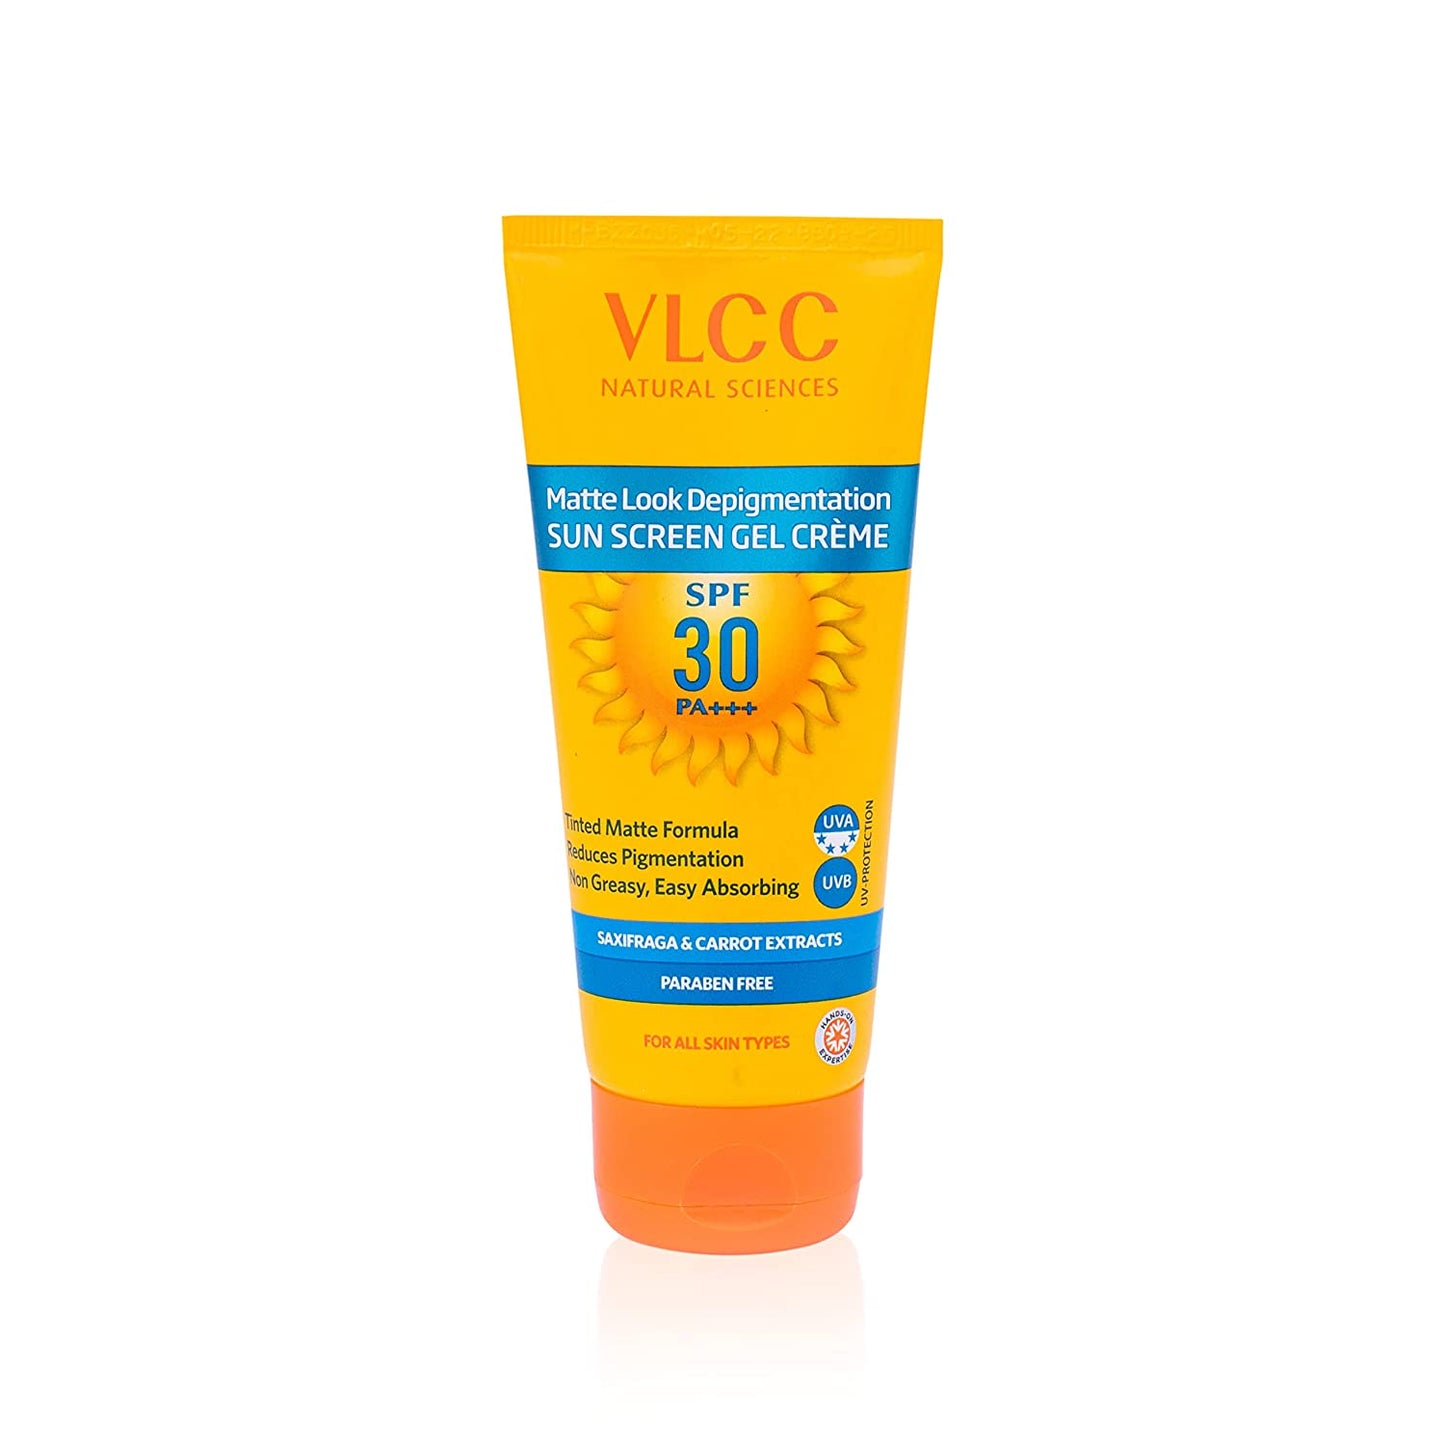 VLCC Matte Look Sunscreen Gel Crème SPF 30 PA+++, Reduces Pigmentation, Non-Greasy, Easy Absorbing = 50gm